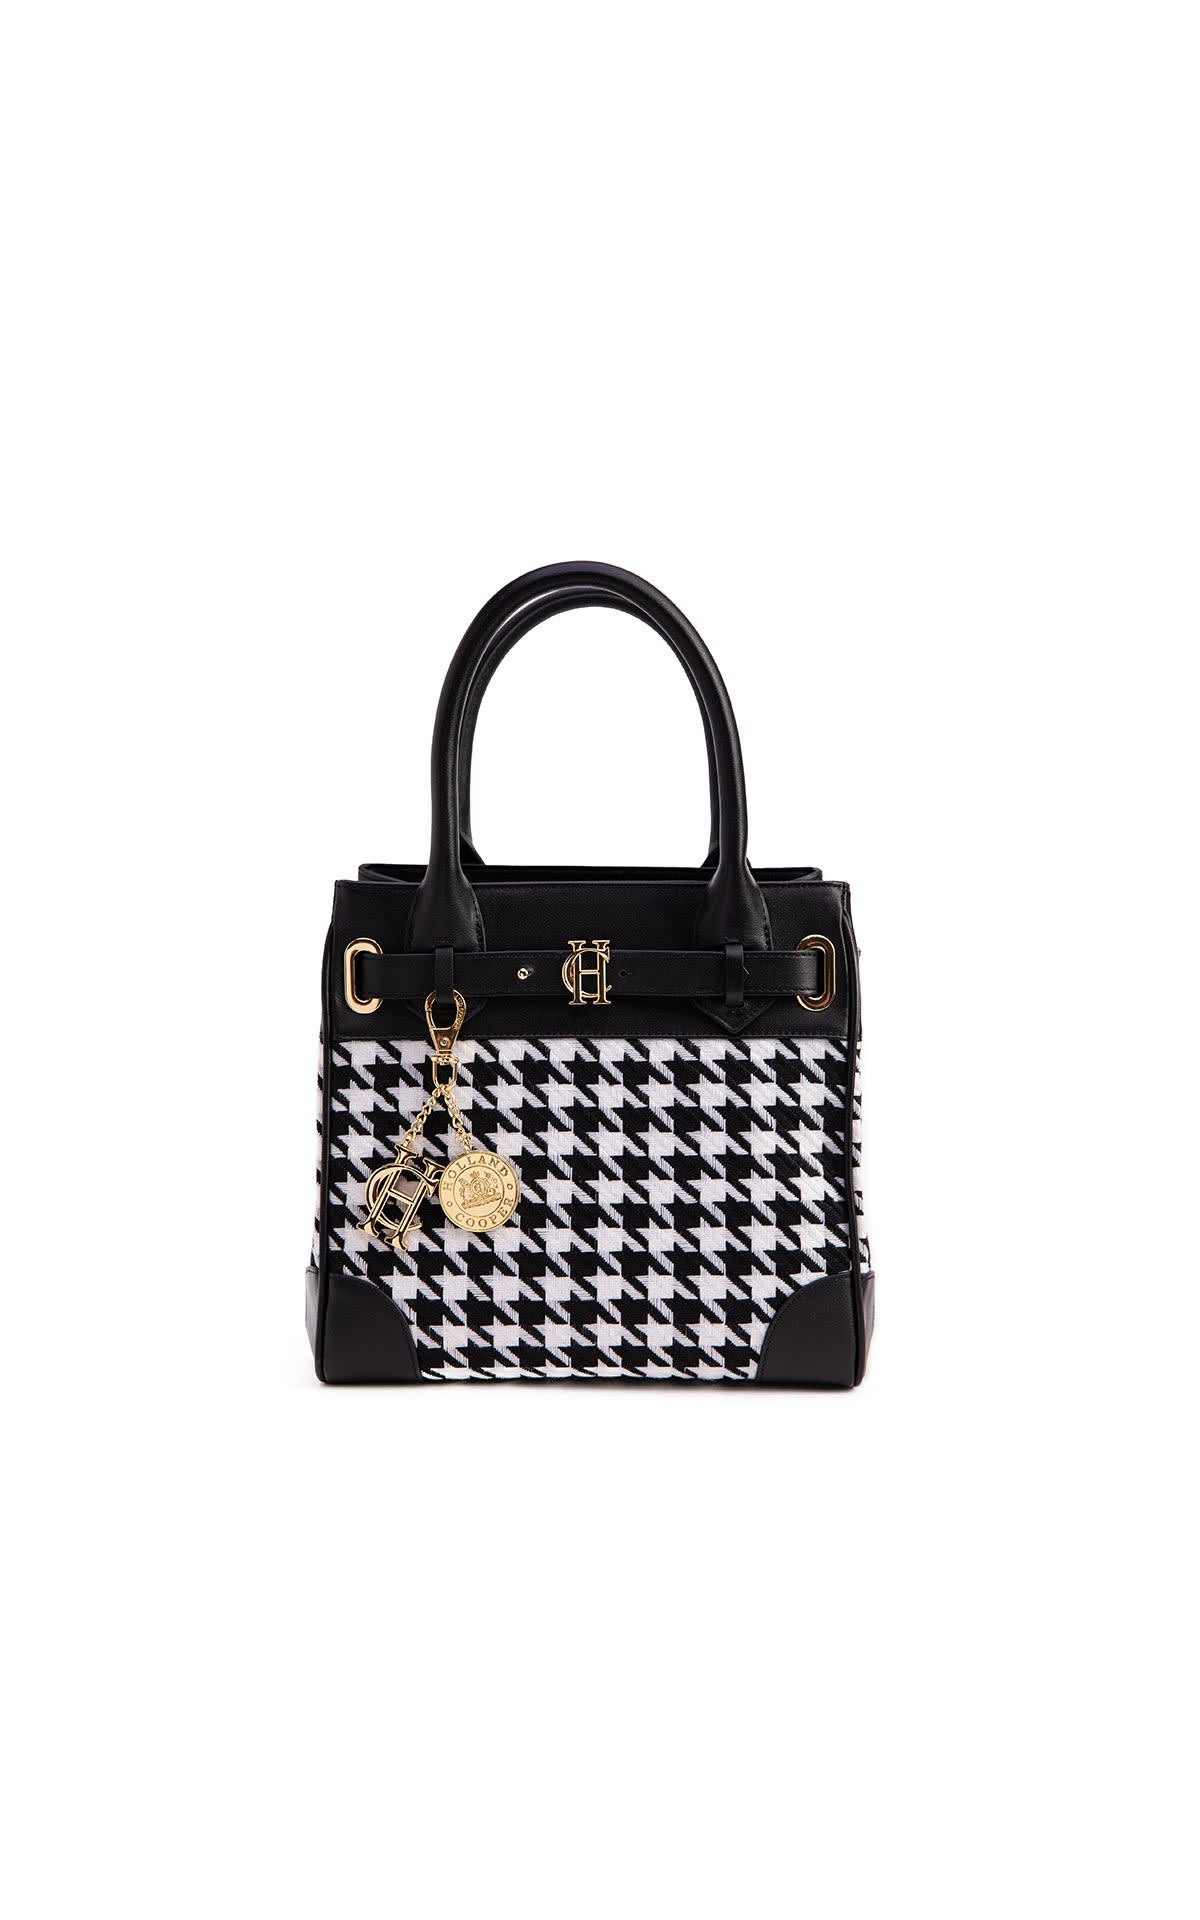 Holland Cooper Ellenborough mini tote houndstooth from Bicester Village